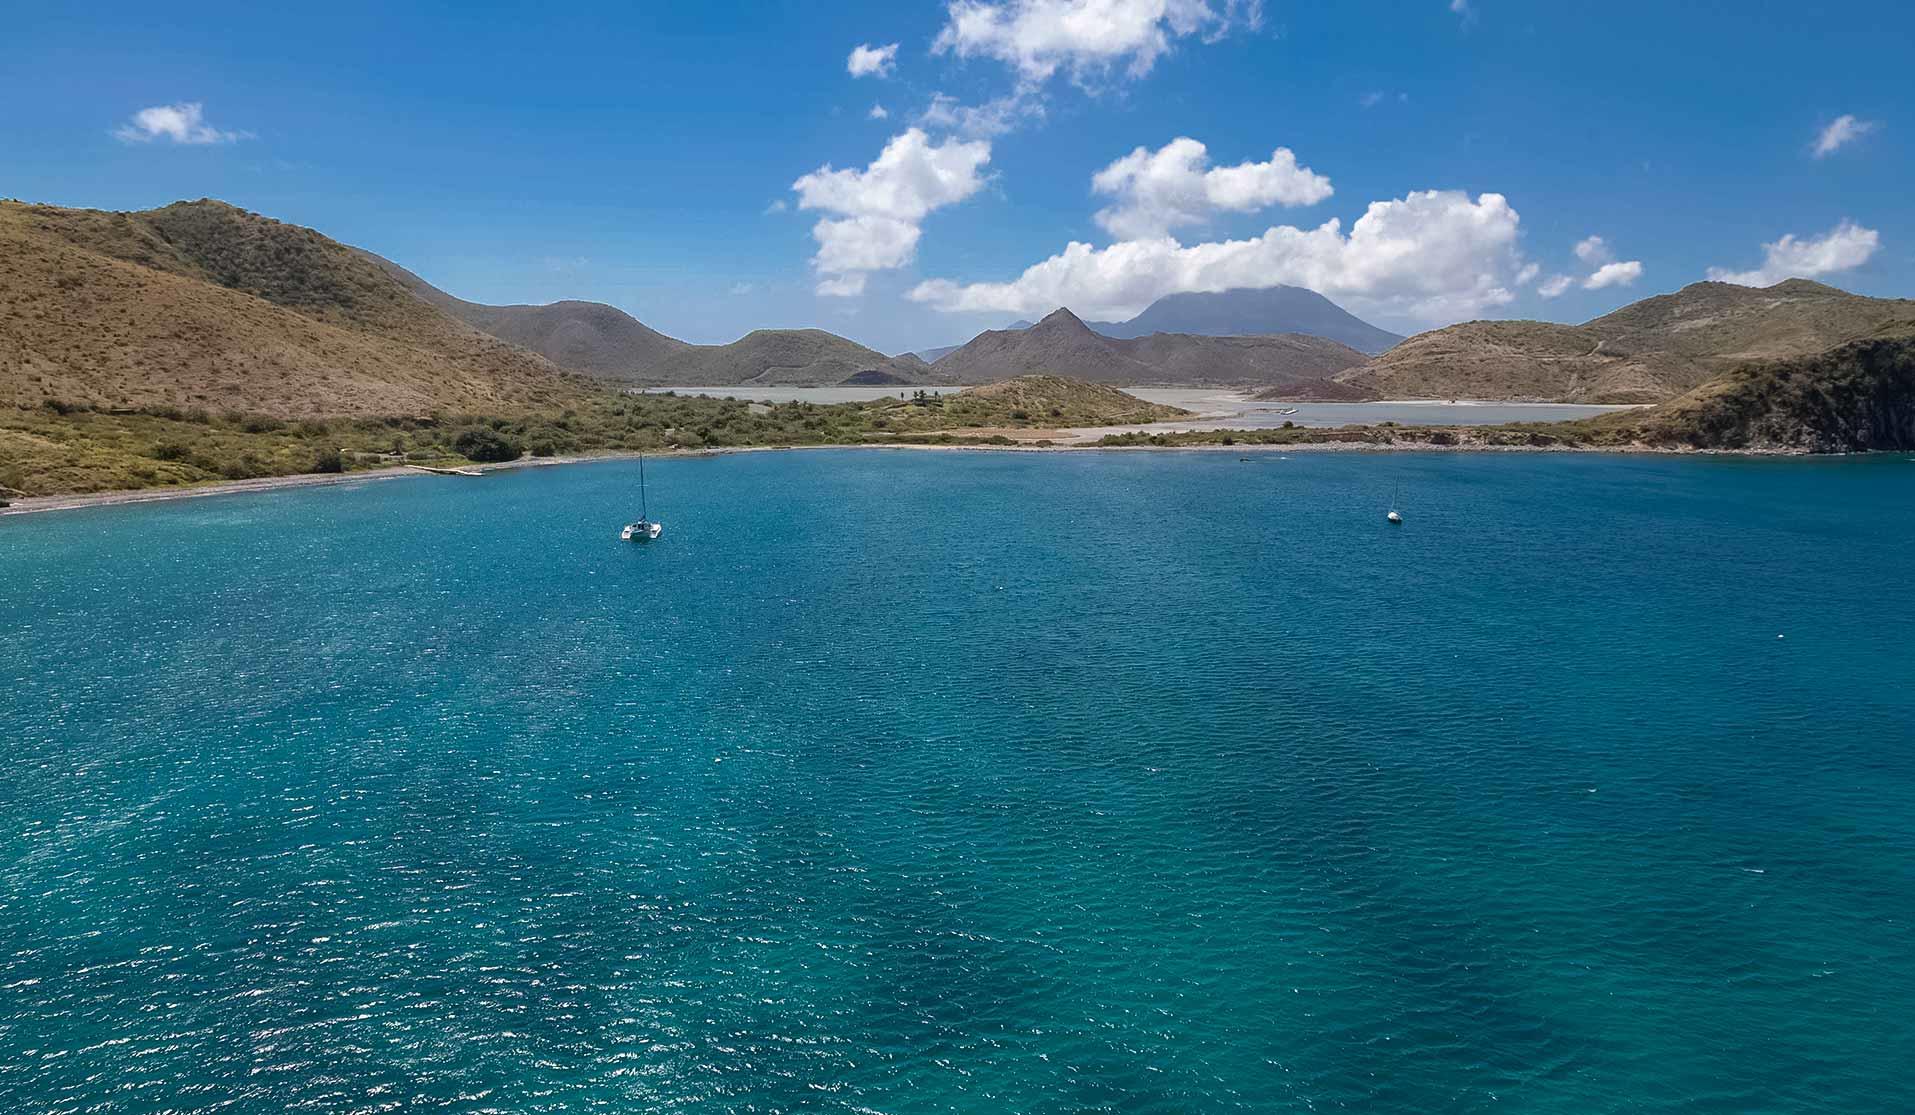 The Island of St. Kitts from the shore